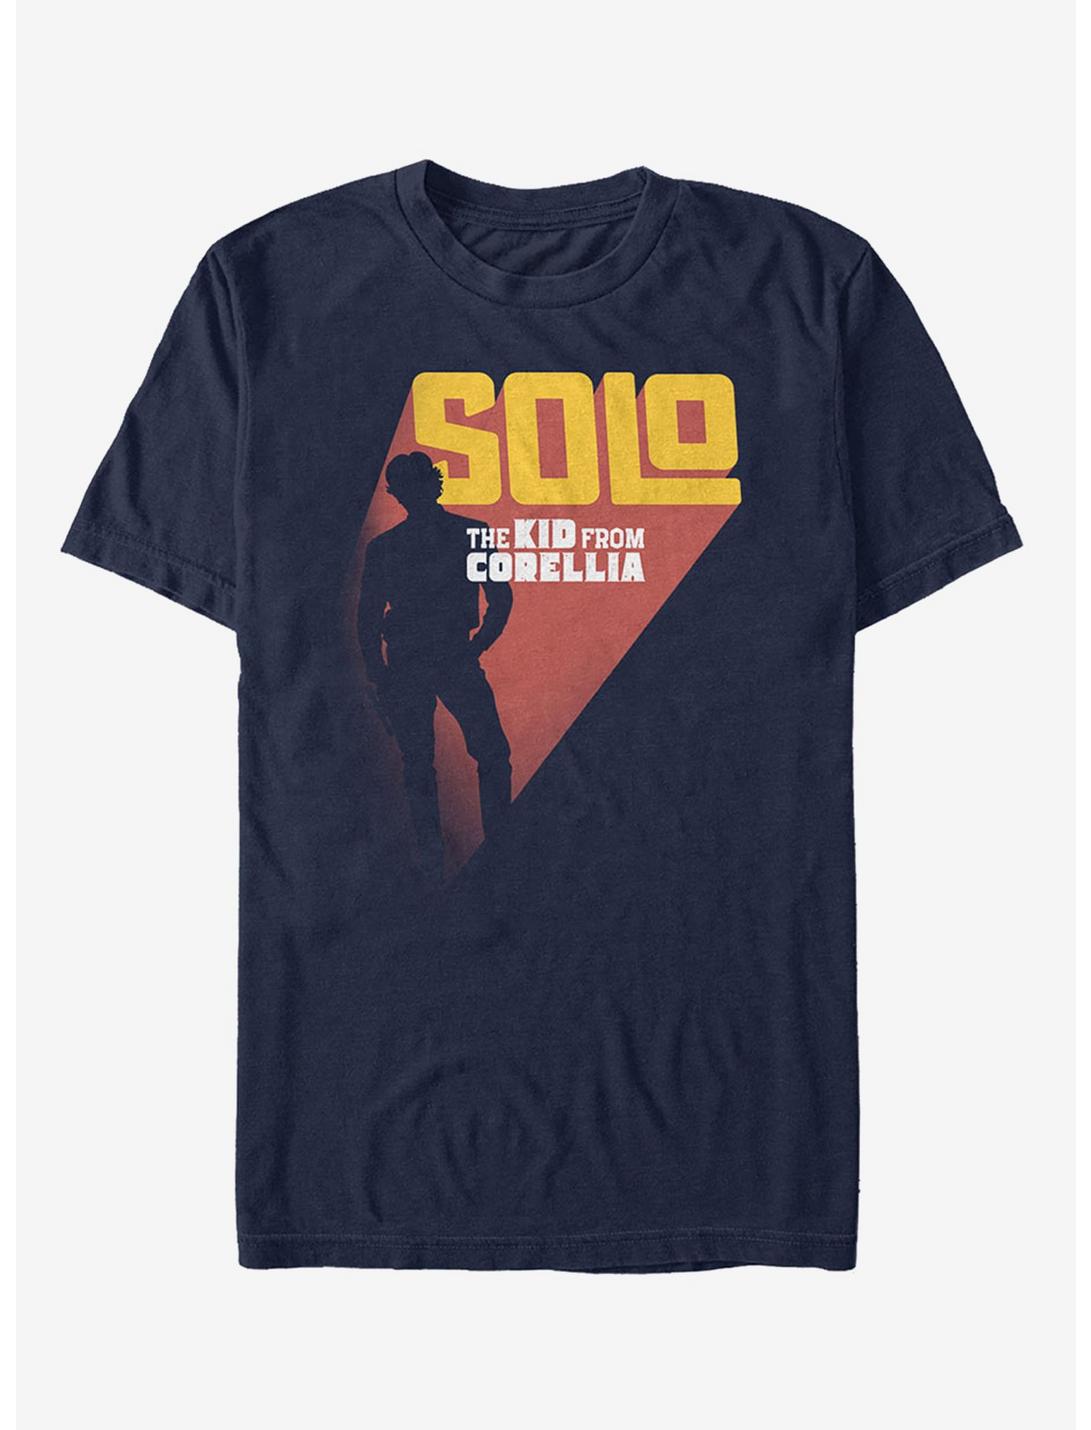 Star Wars Kid from Corellia Silhouette T-Shirt, NAVY, hi-res